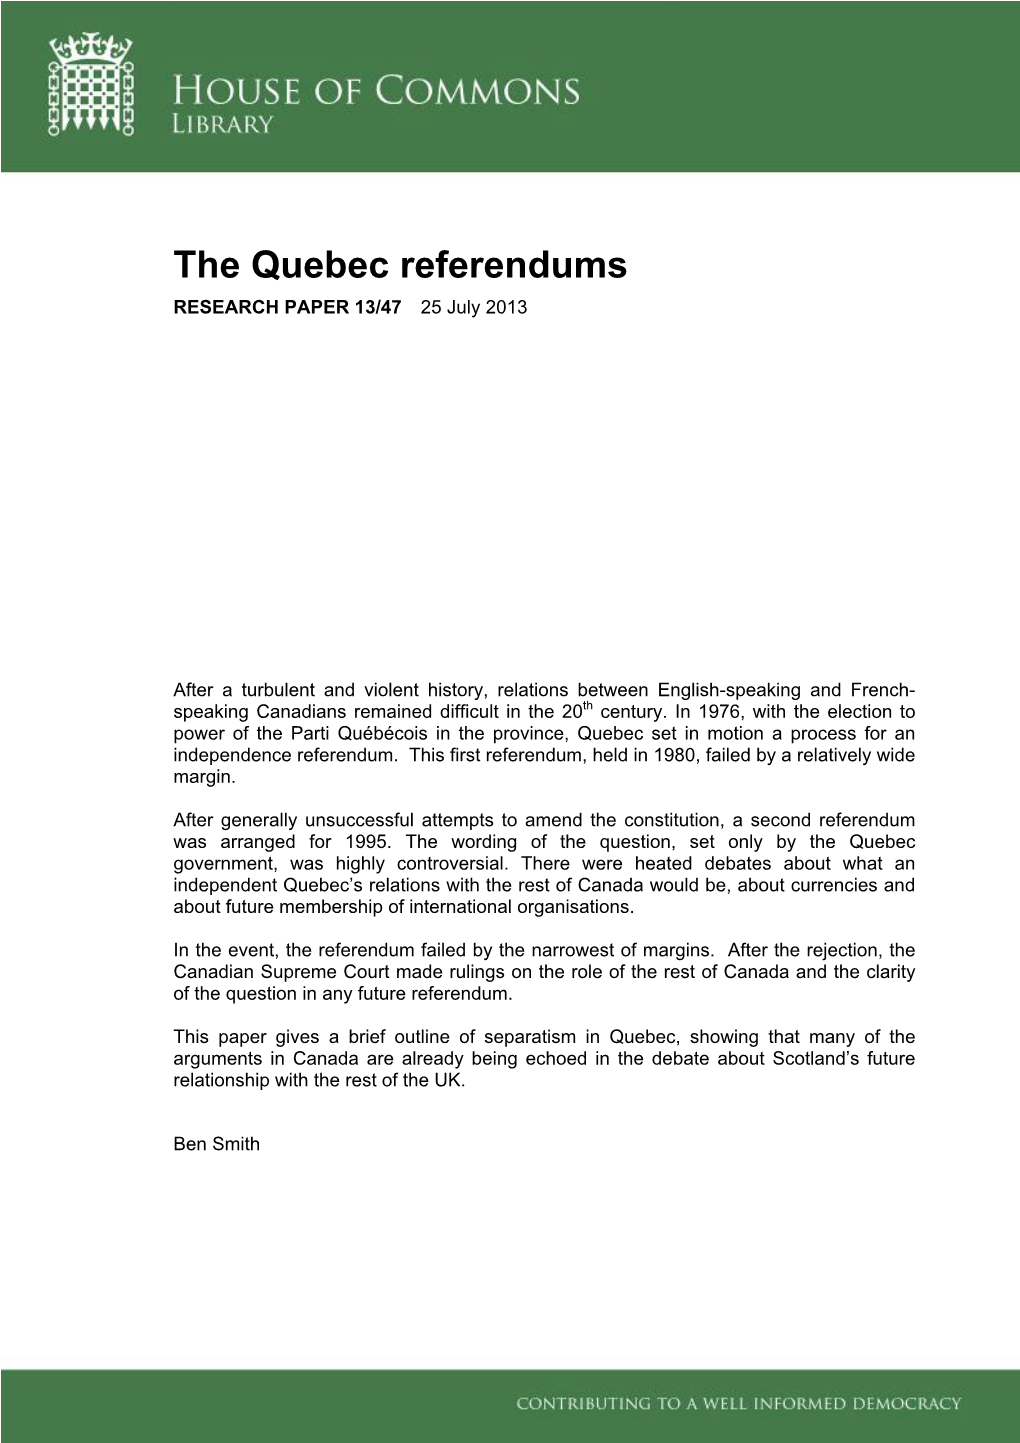 The Quebec Referendums RESEARCH PAPER 13/47 25 July 2013